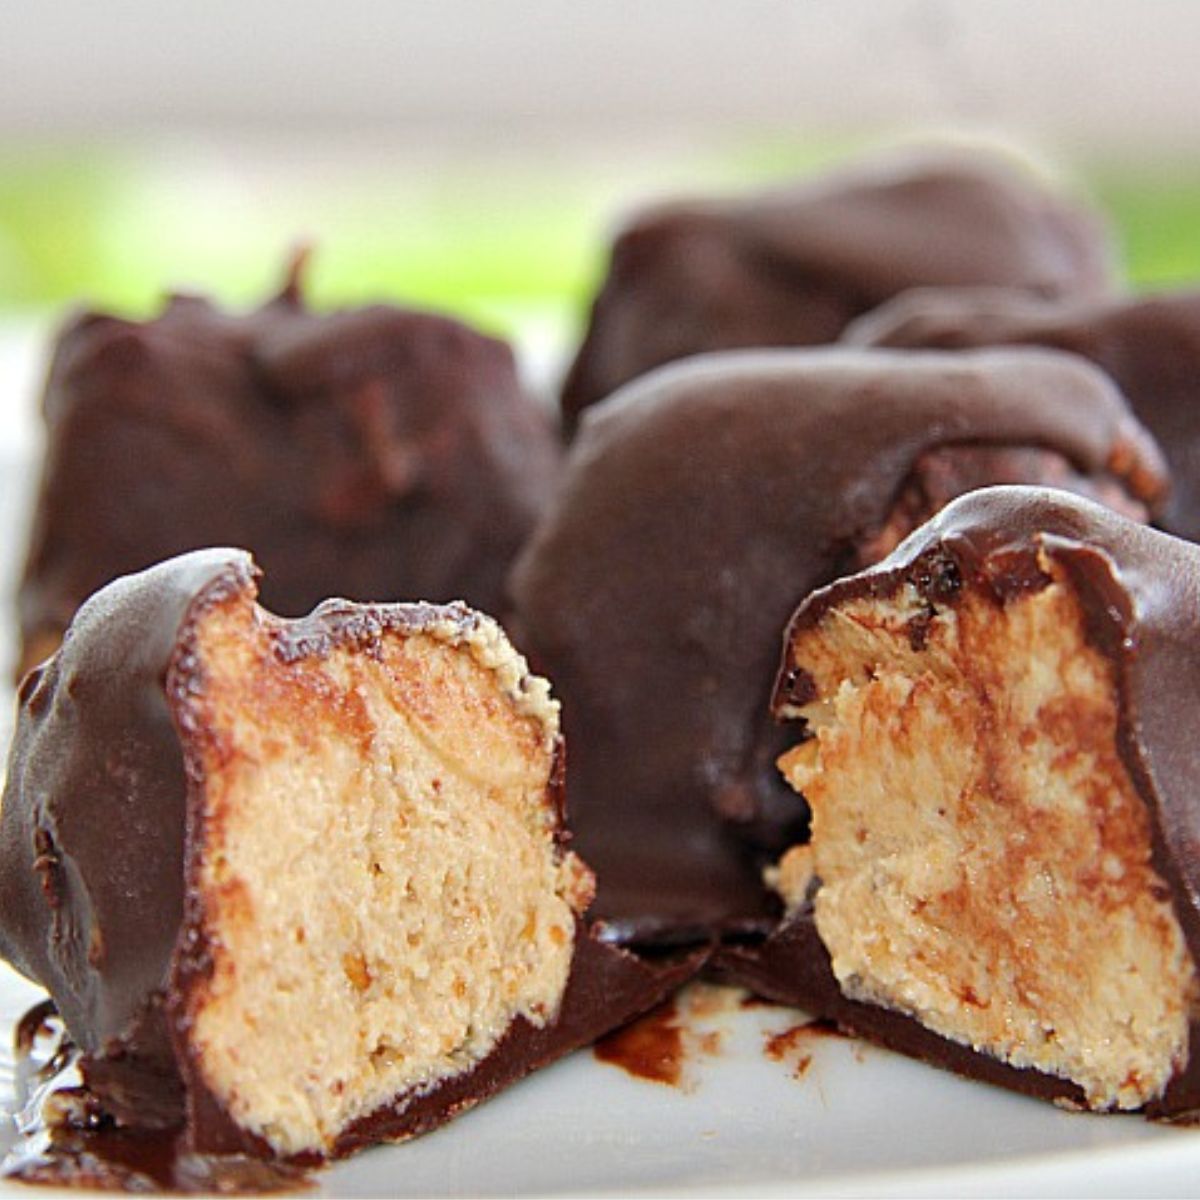 Keto chocolate peanut butter balls on a plate.